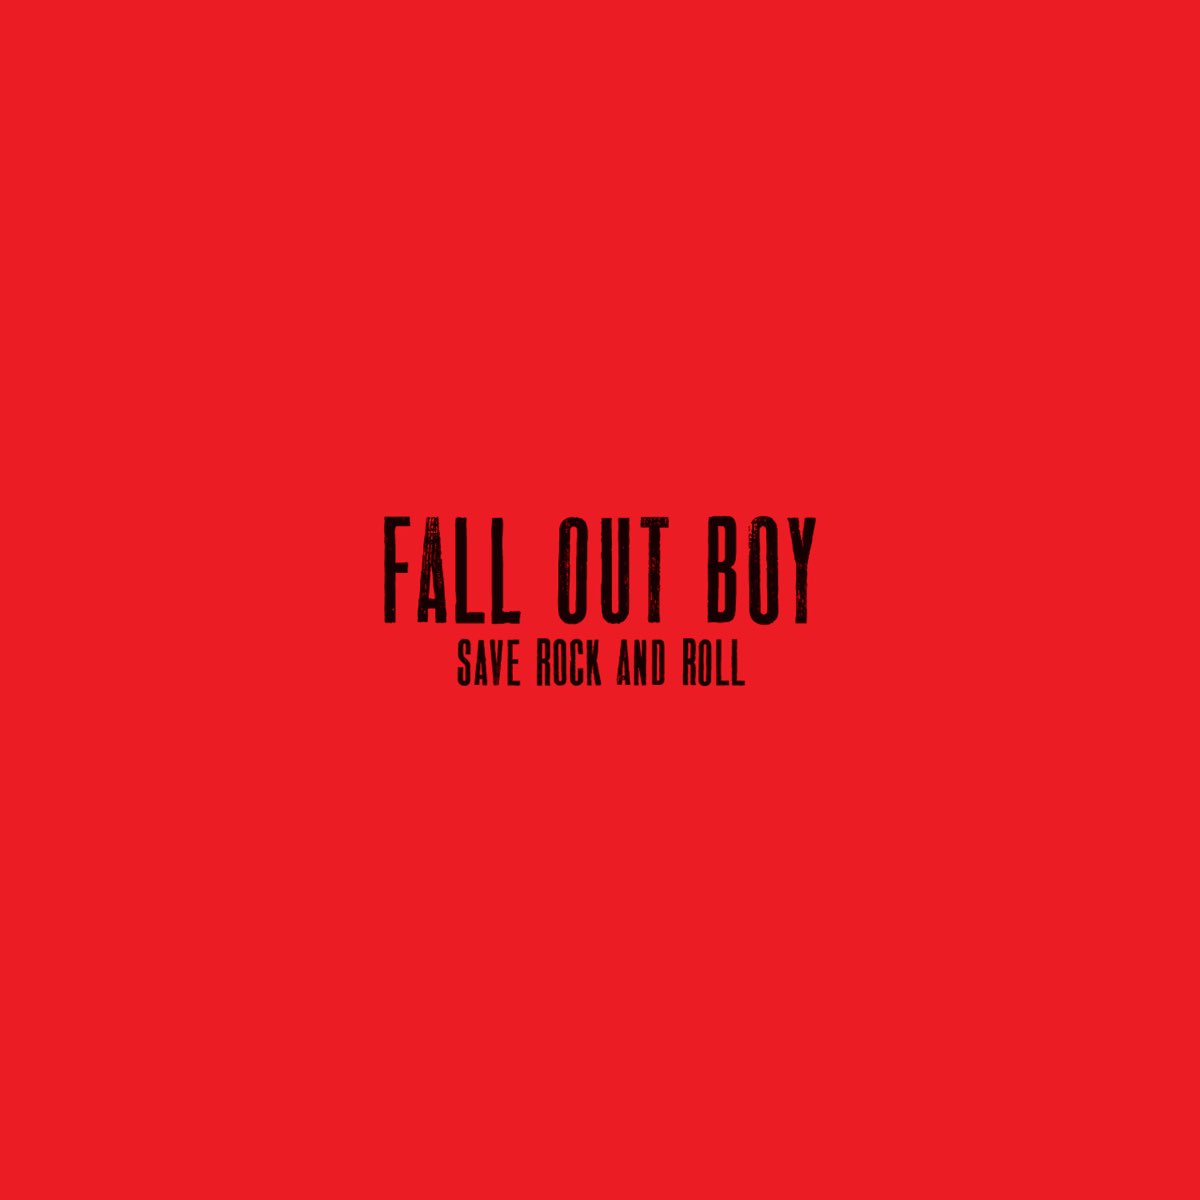 Save Rock and Roll - Album by Fall Out Boy - Apple Music